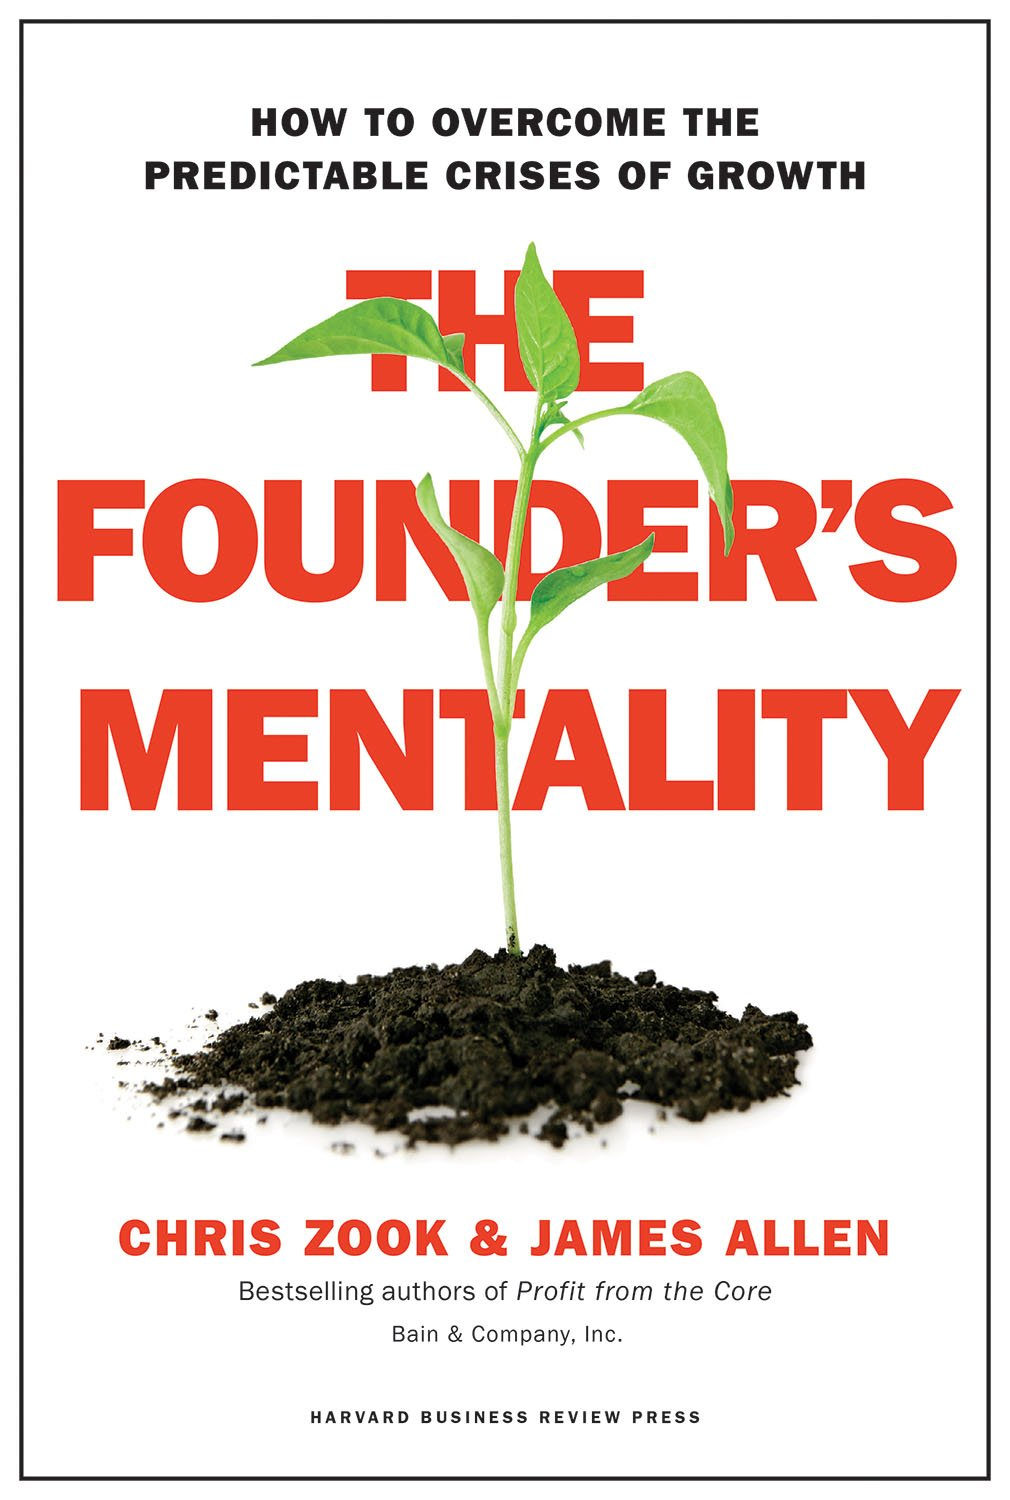 Book “The Founder’s Mentality”